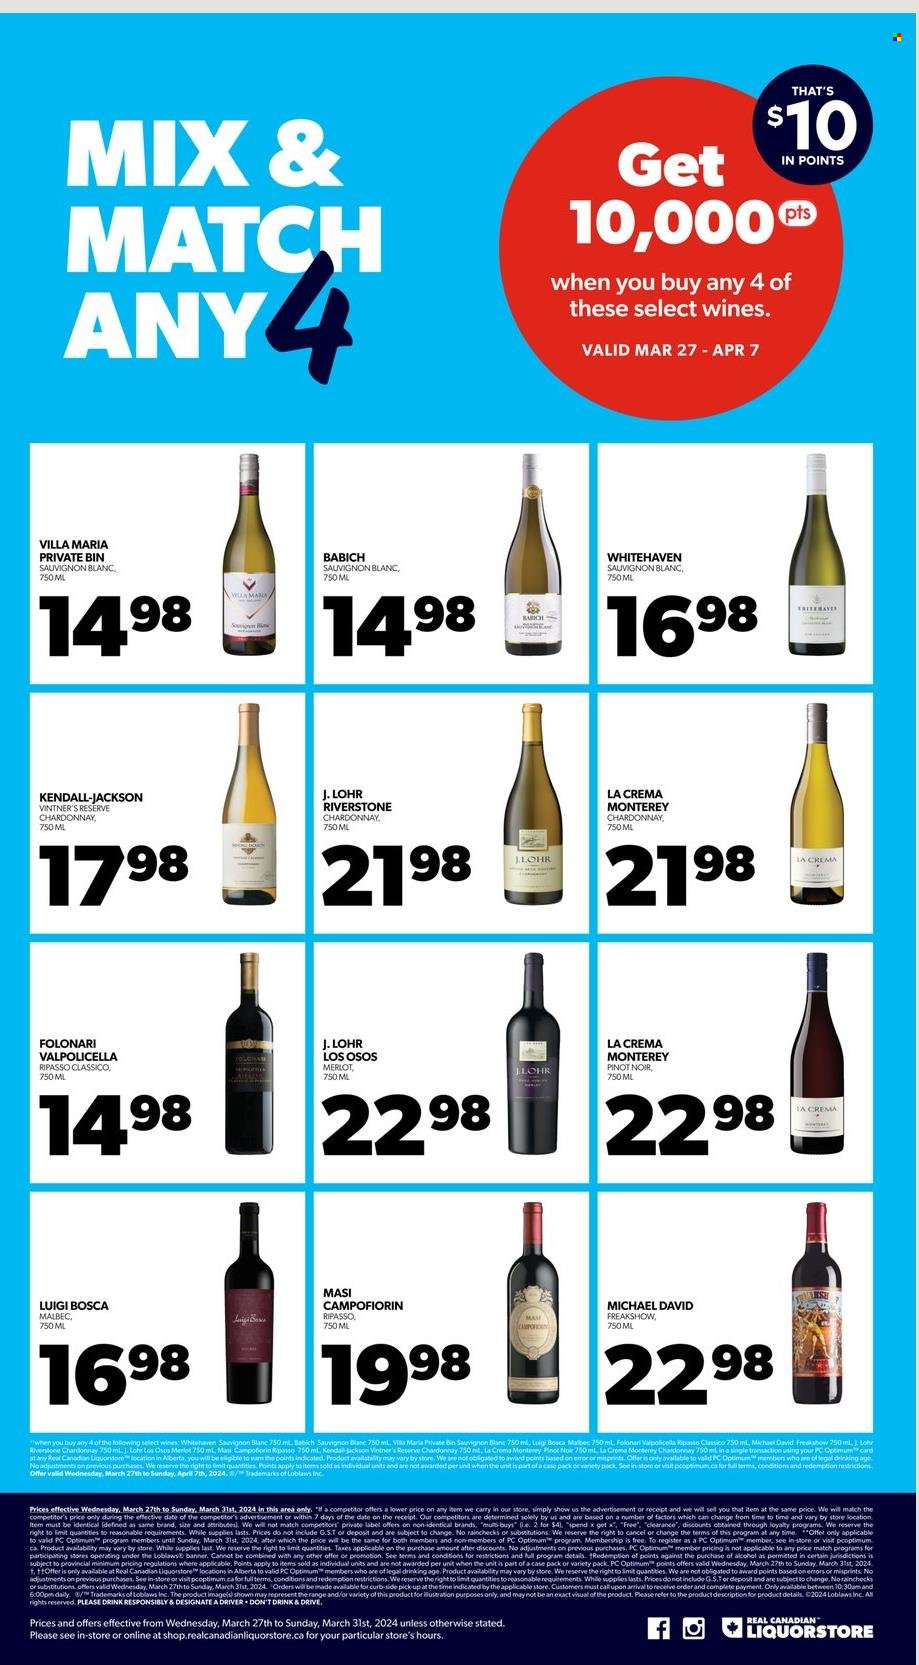 Real Canadian Liquorstore flyer  - March 27, 2024 - March 31, 2024.